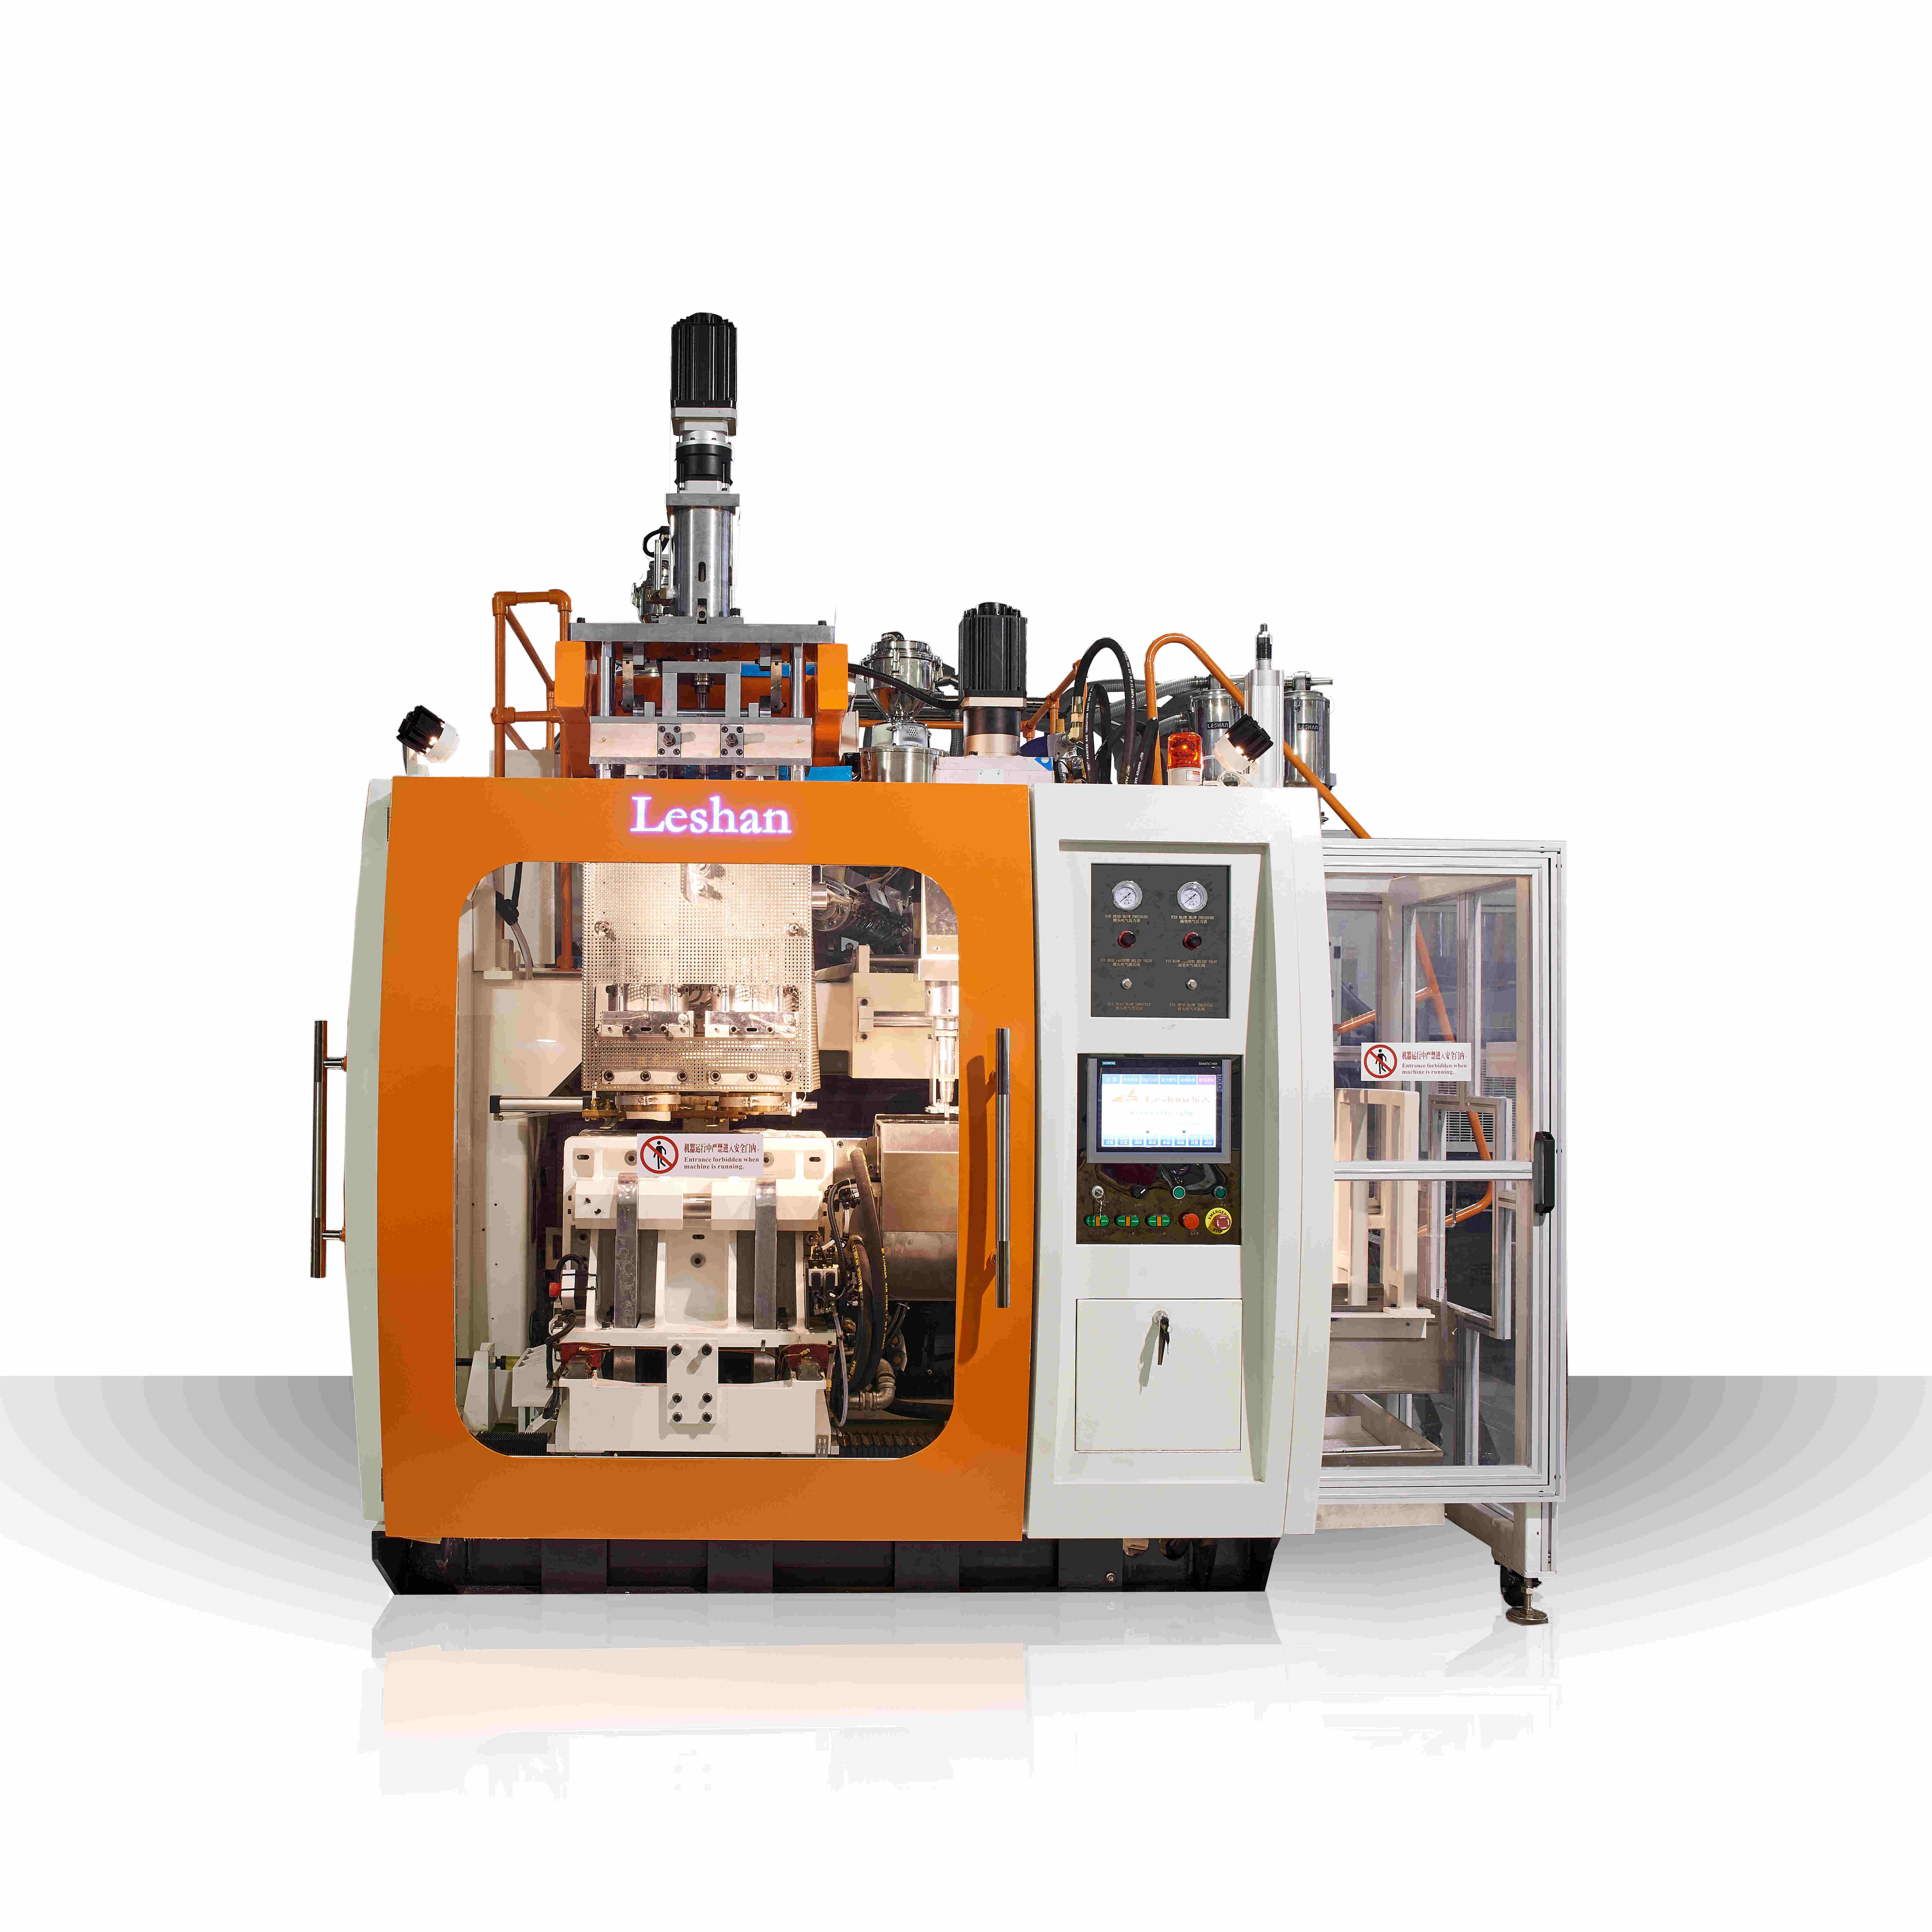 About big blow molding machines,Do you provide samples? ls it free or extra?